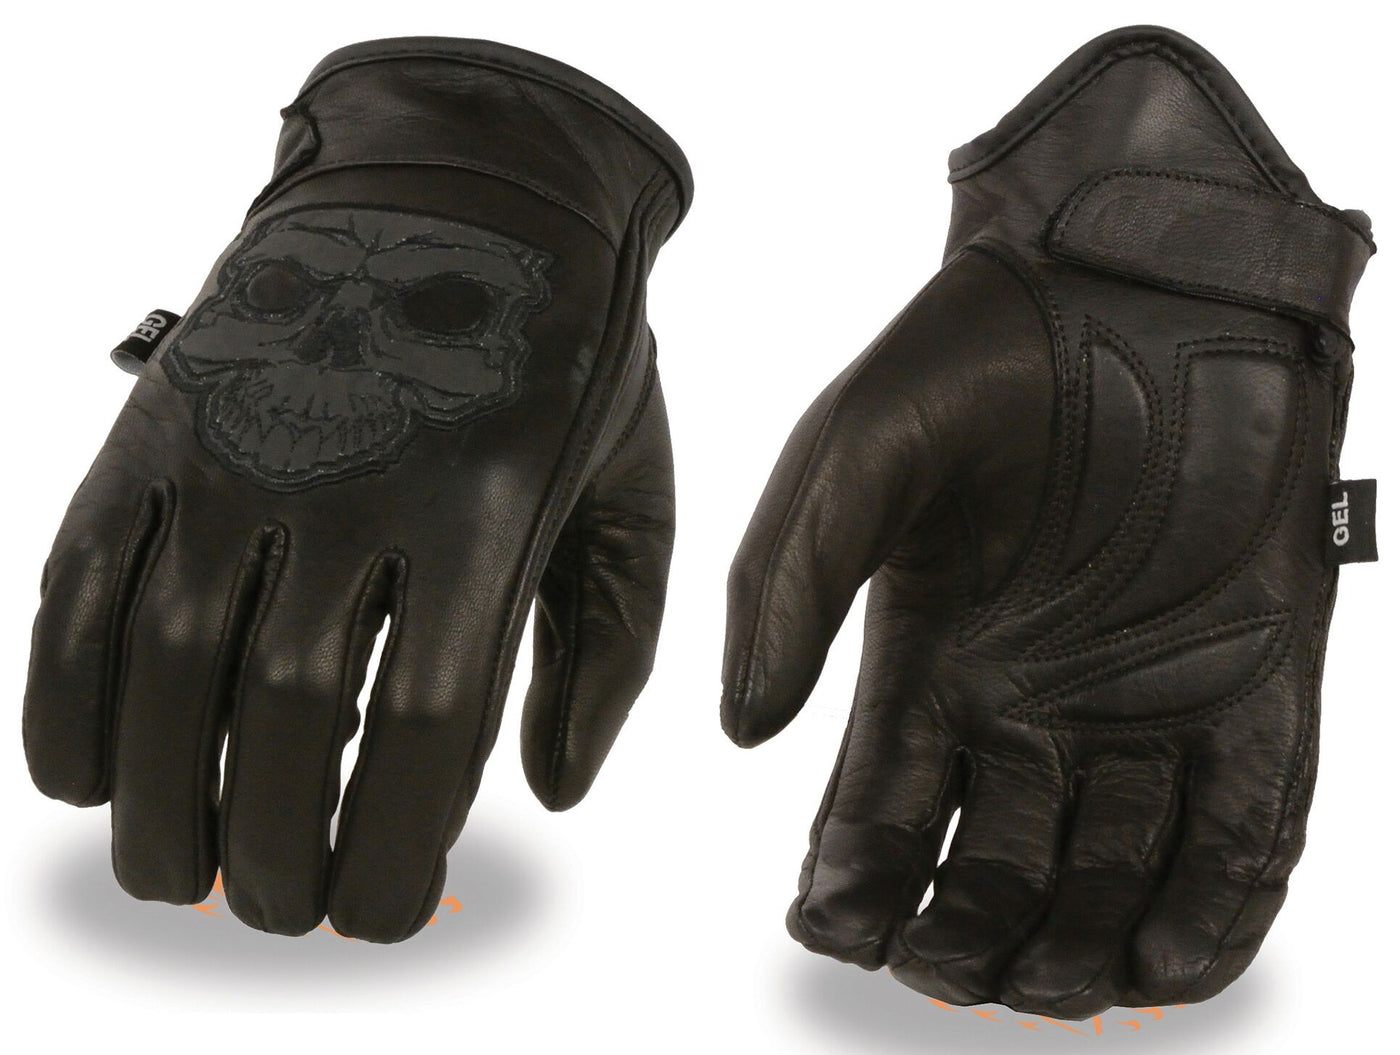 Leather motorcycle riding gloves with reflective skull pictured on back of hand. They are available in sizes XS-3X and have a thermal lining and velcro wrist closure. They are available in our shop just outside Nashville in Smyrna, TN.